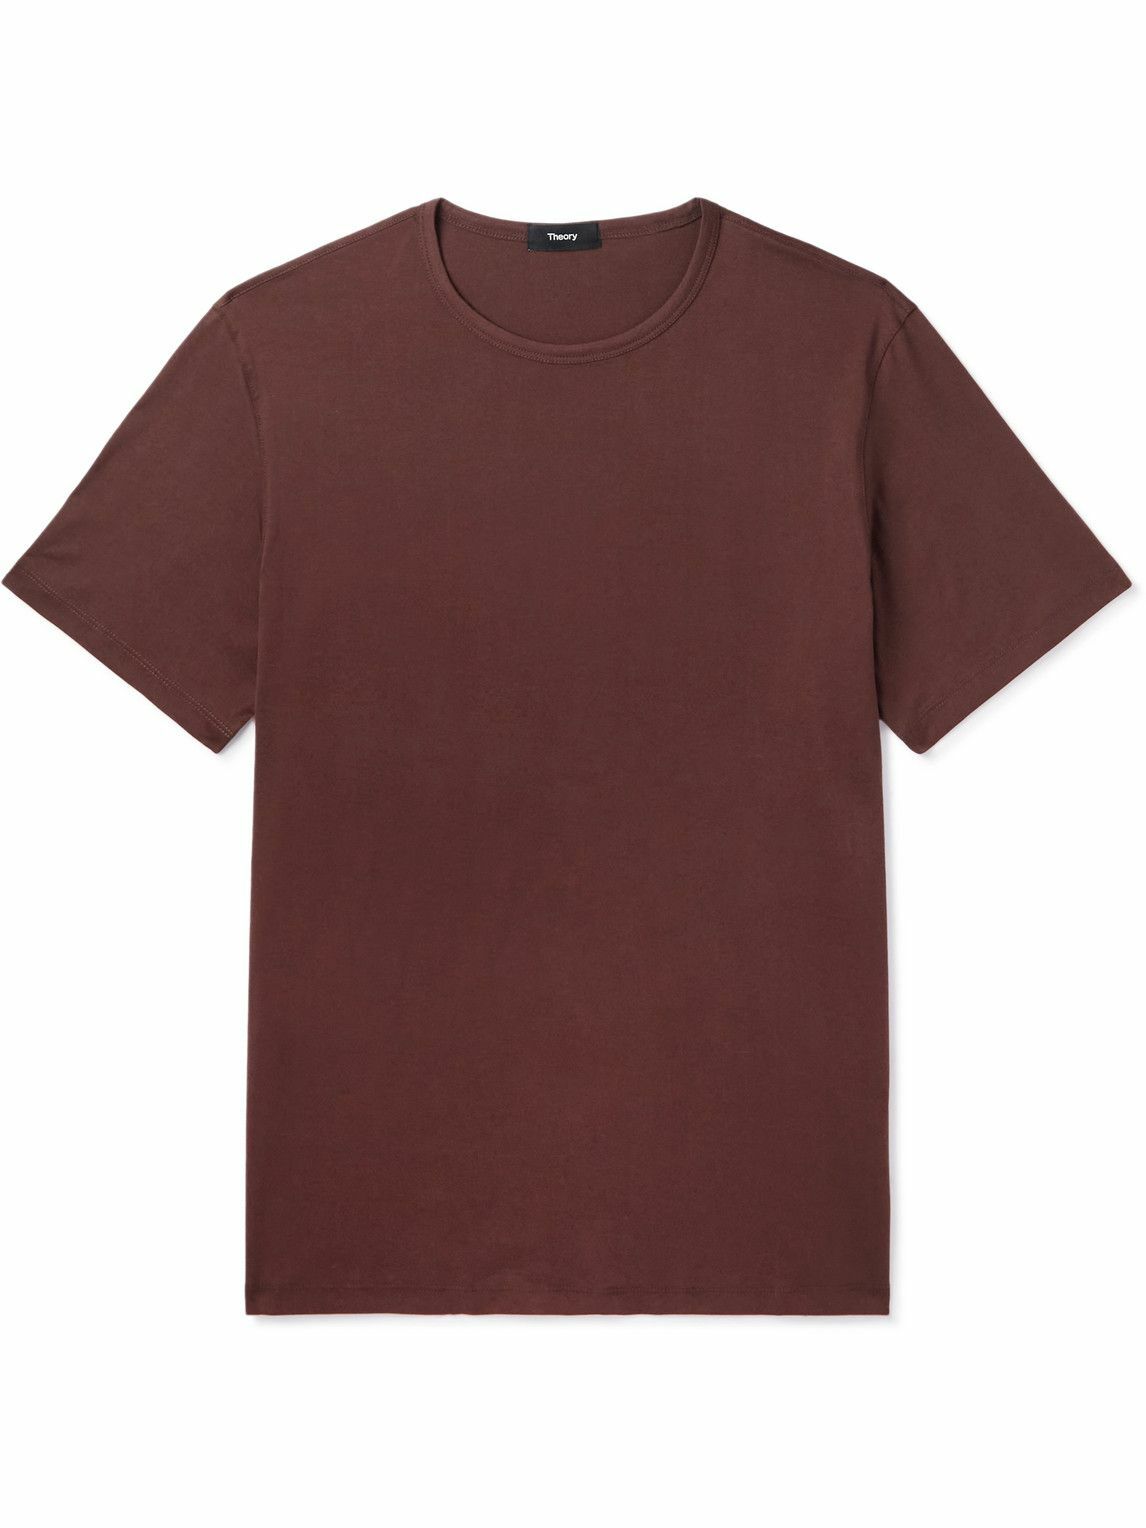 Theory - Cotton-Jersey T-Shirt - Brown Theory